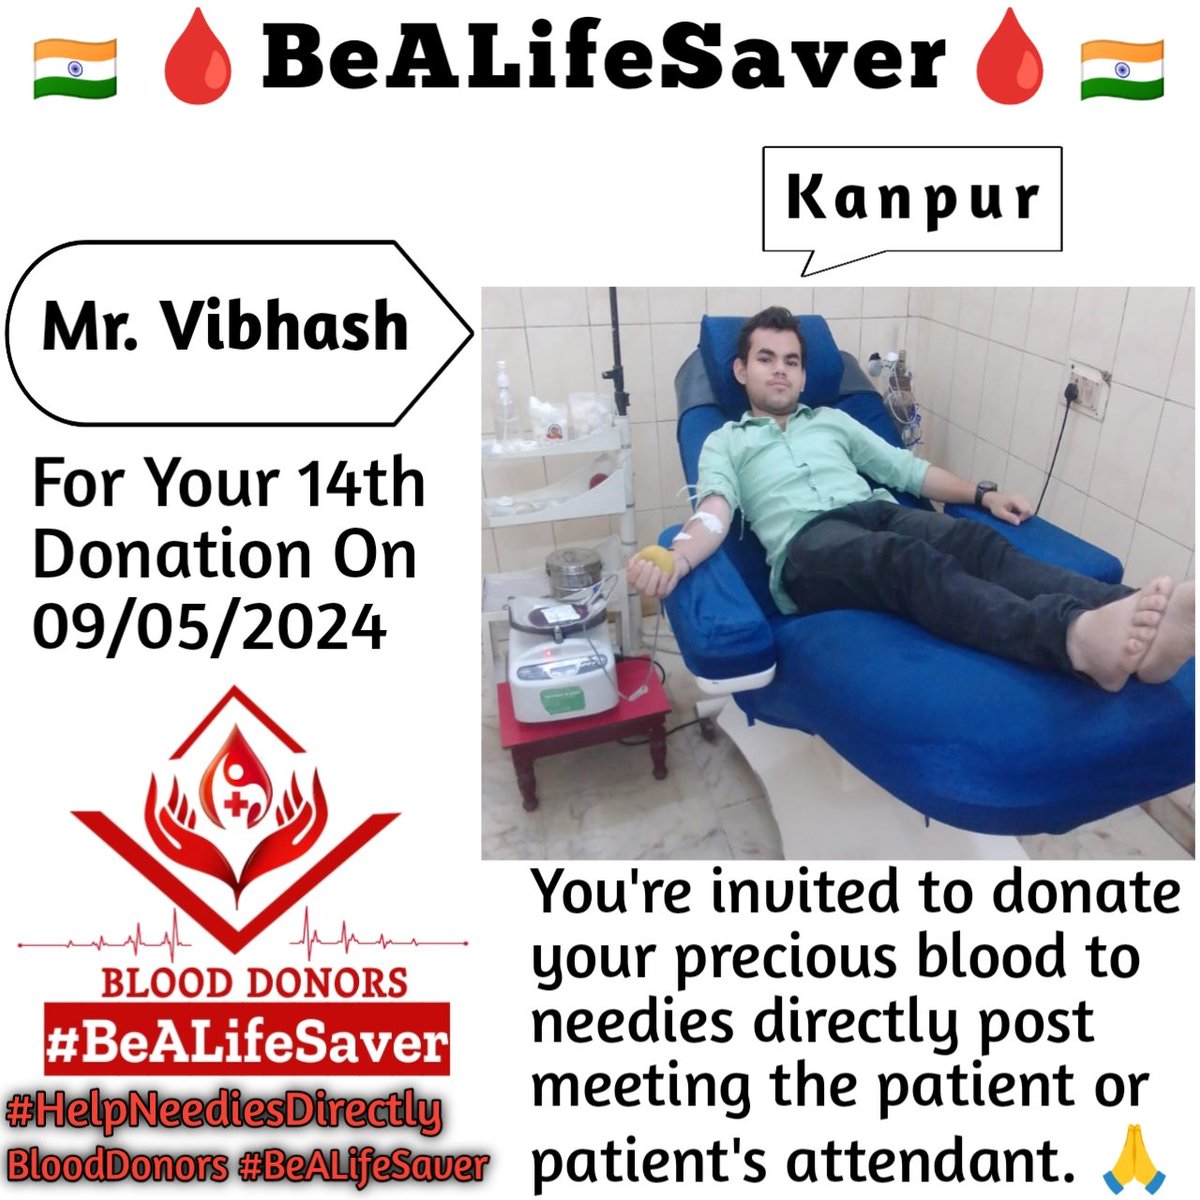 🙏 Congrats For 14th Blood Donation 🙏
Kanpur BeALifeSaver
Kudos_Mr_Vibhash_Ji

Today's hero
Mr. Vibhash Ji donated blood in Kanpur for the 14th Time for one of the needies. Heartfelt Gratitude and Respect to Vibhash Ji for his blood donation for Patient admitted in Kanpur.